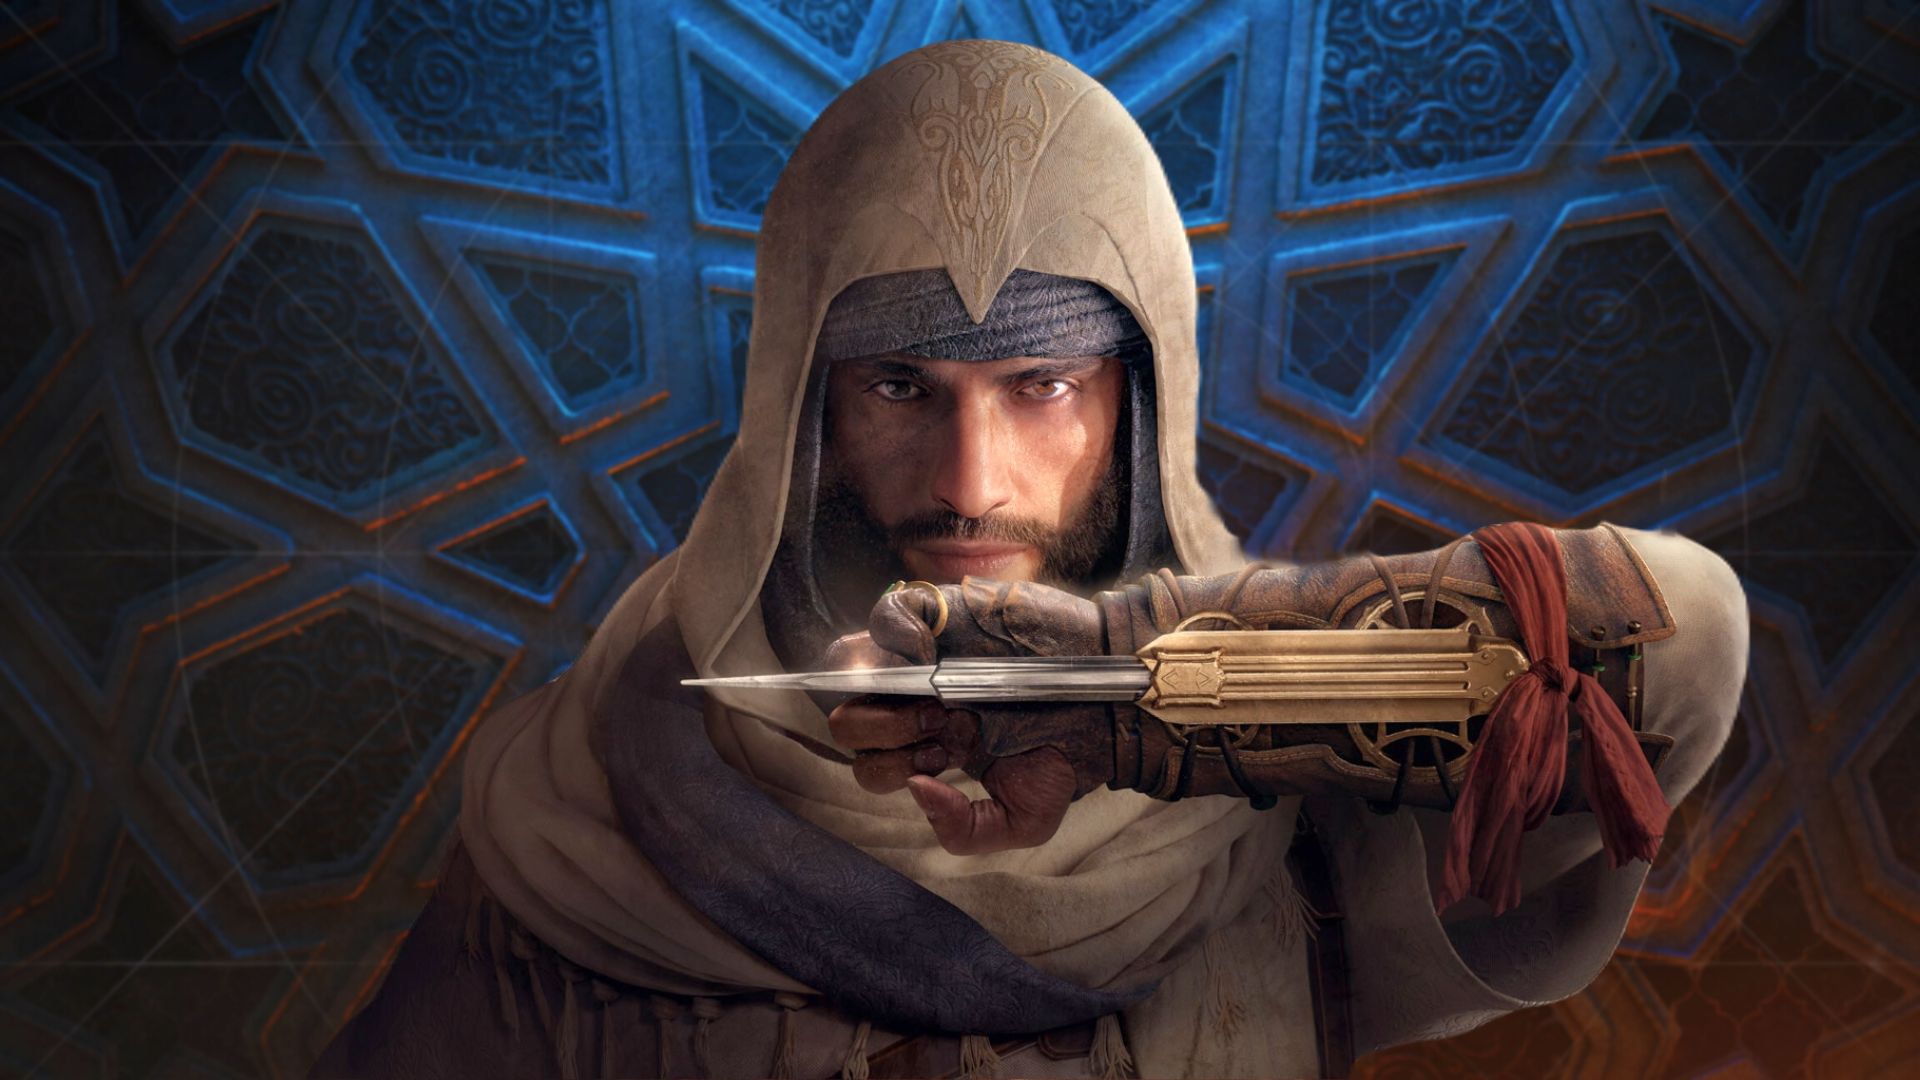 Assassin's Creed: Mirage in Assassin's Creed 